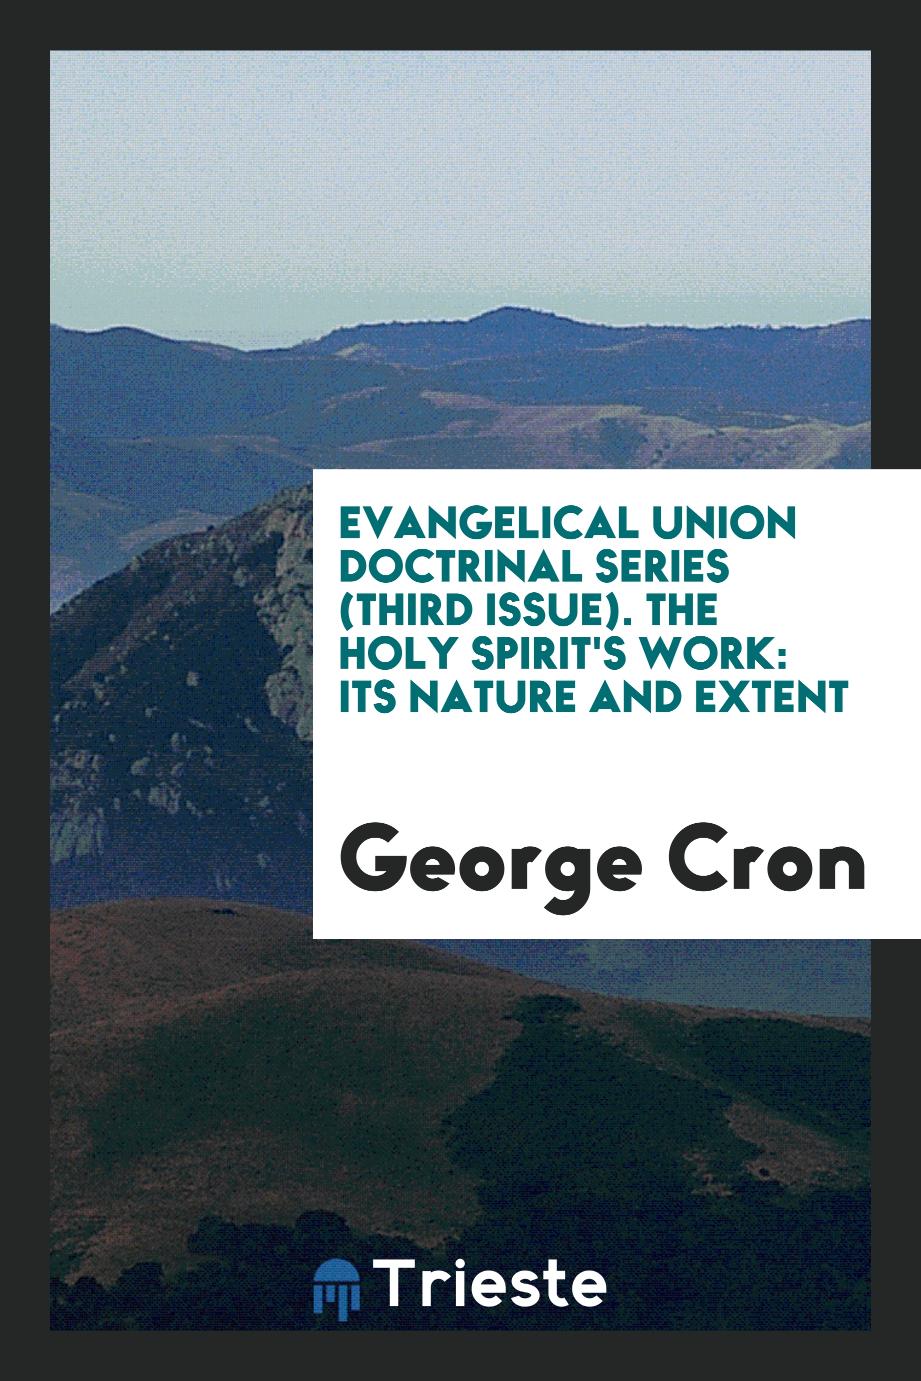 Evangelical Union Doctrinal Series (Third Issue). The Holy Spirit's Work: Its Nature and Extent